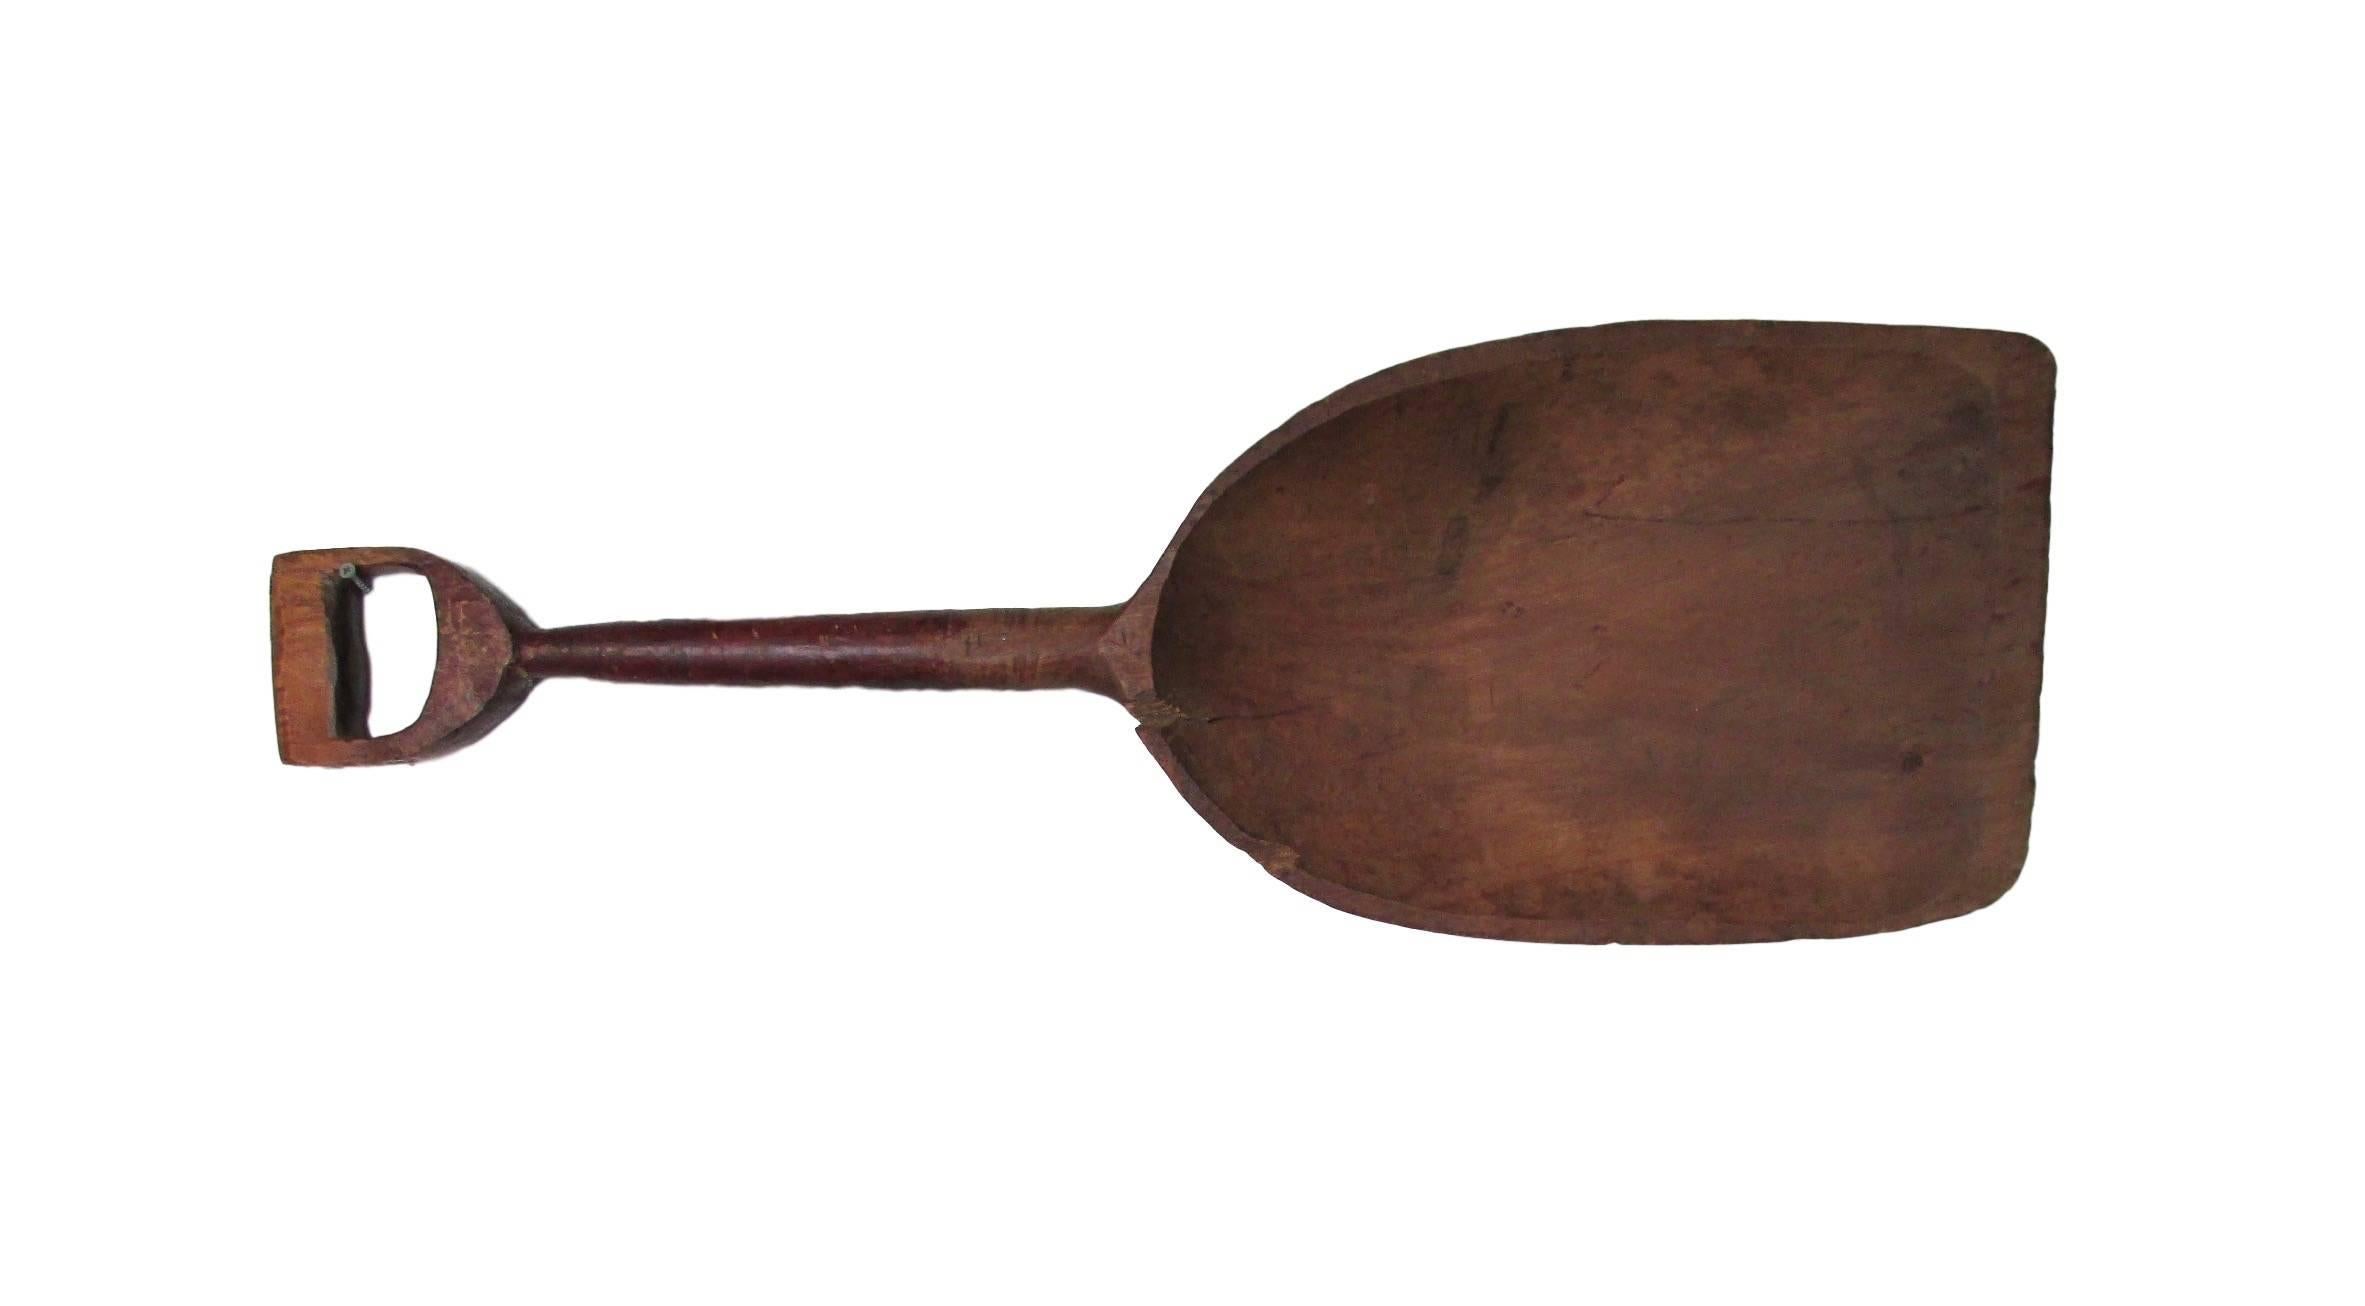 This is a wonderful hand-carved Primitive Folk Art shovel with original red paint on the handle.